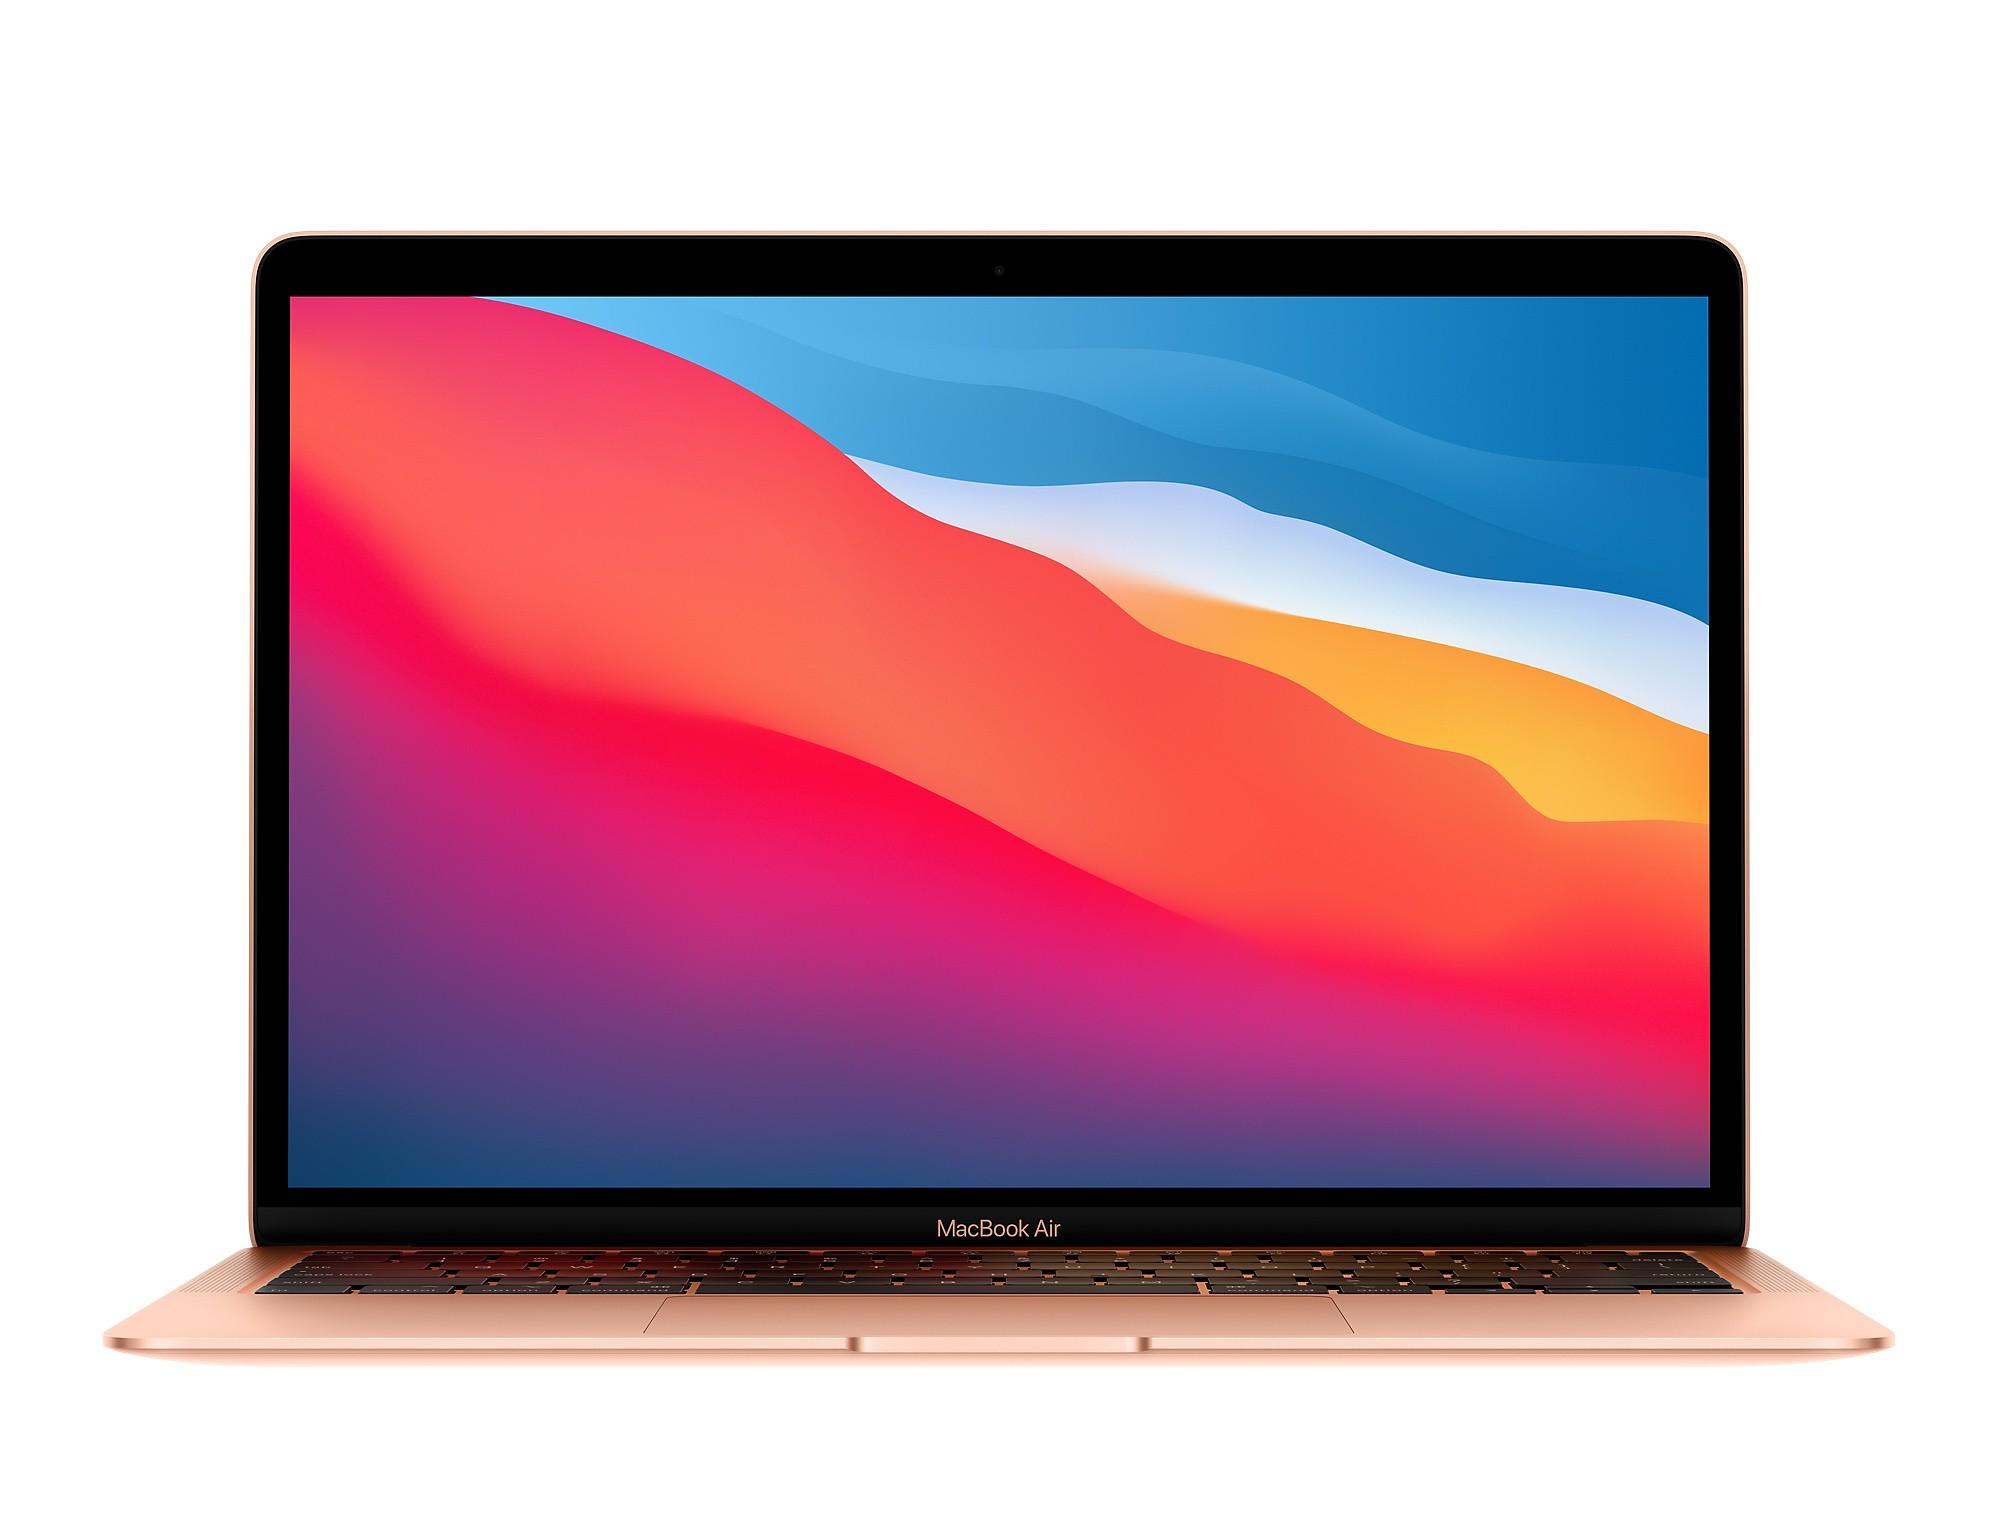 Apple MacBook Air 13.3 Inch Gold 2021 with Retina M1 Chip 8-Core CPU & 256GB SSD | MGND3